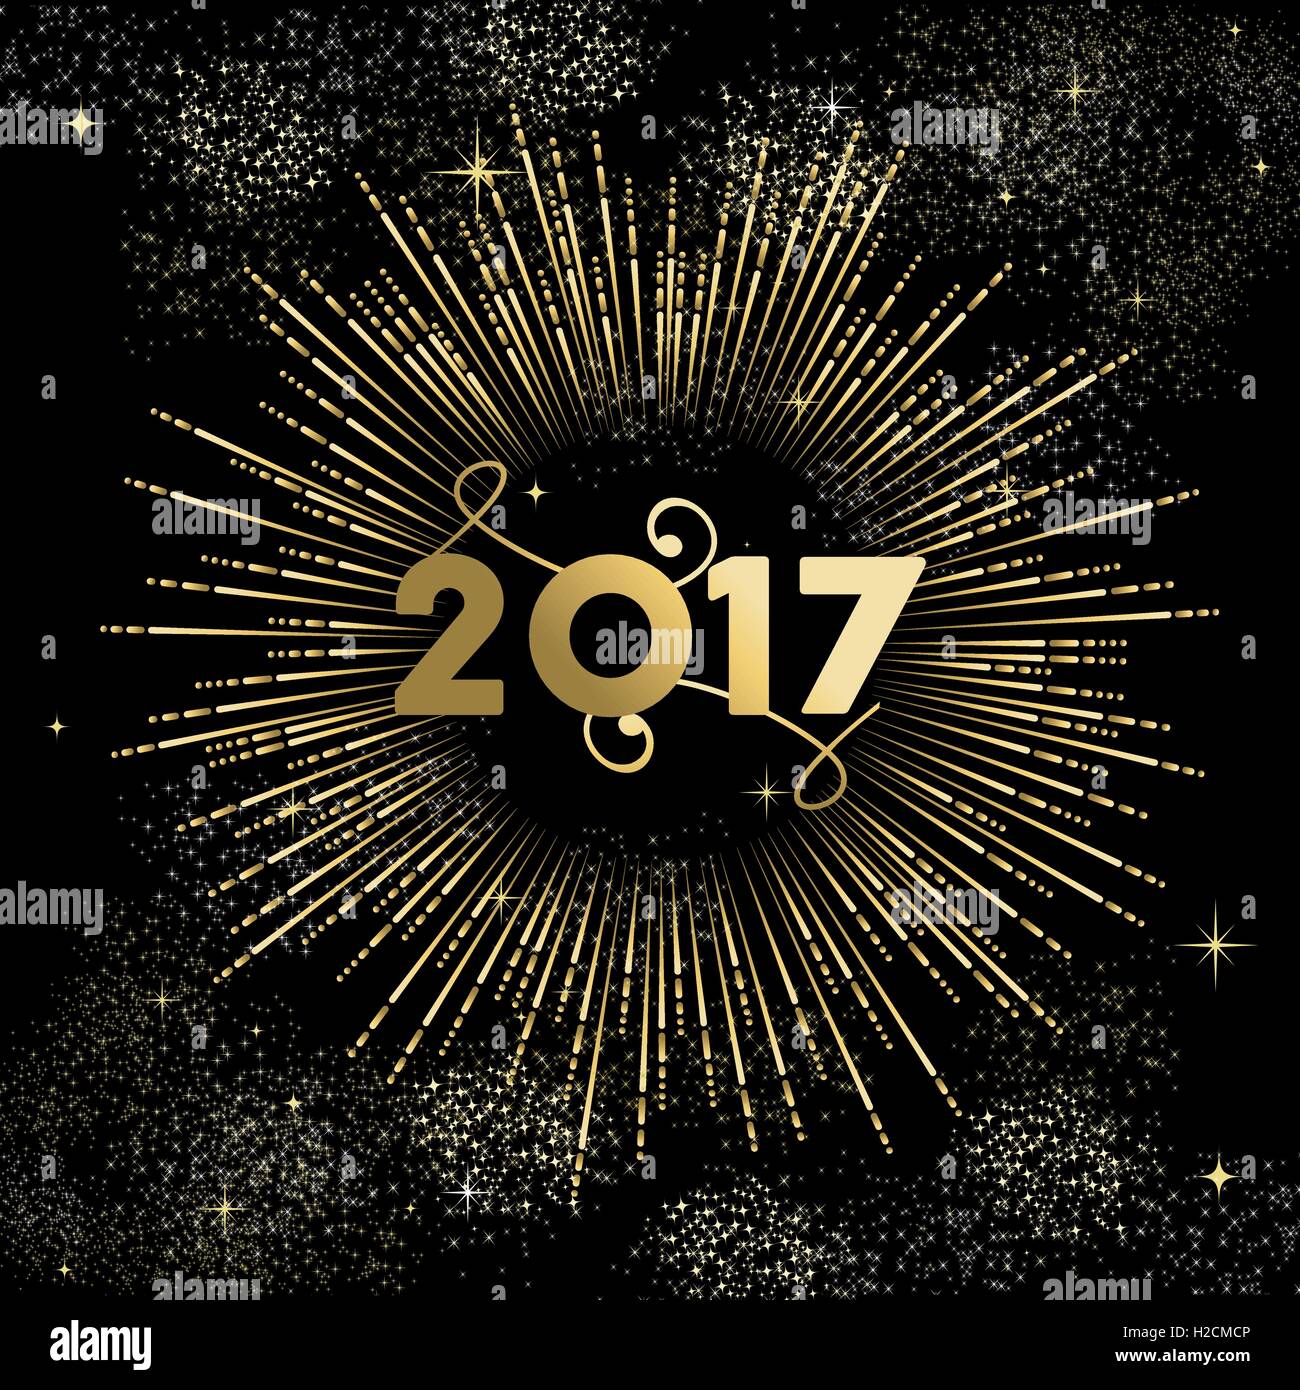 Happy New Year 2017 gold design with firework explosion illustration. Ideal for holiday greeting card or poster. EPS10 vector. Stock Vector